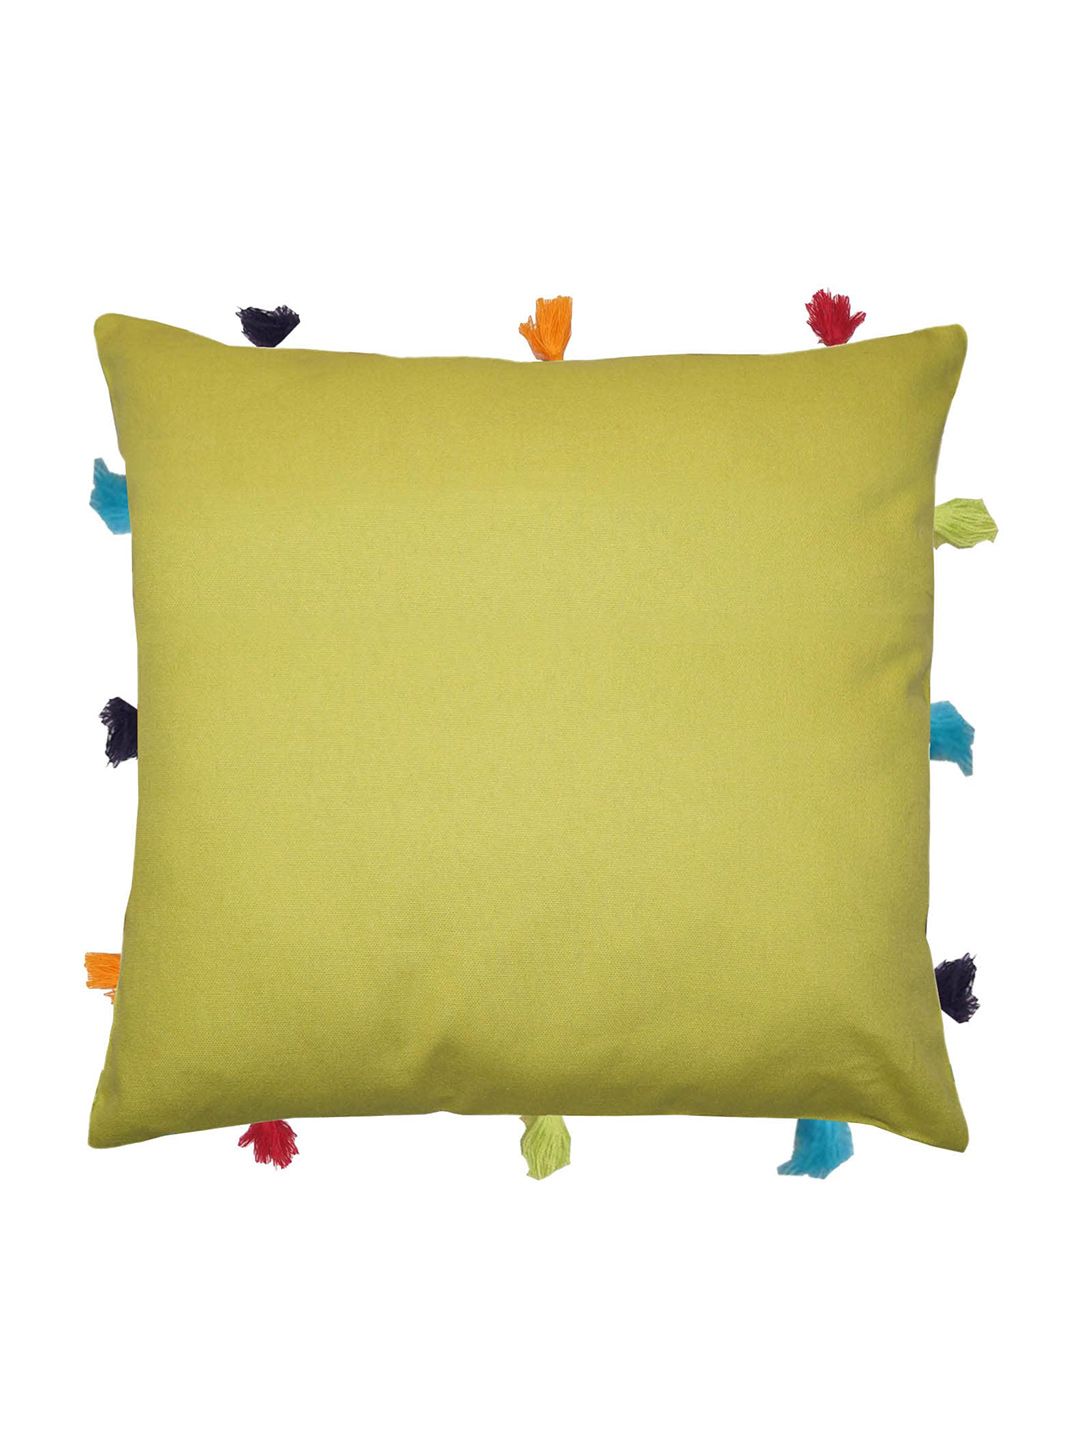 Lushomes Green Self Design Cushion Cover with Tassels Price in India